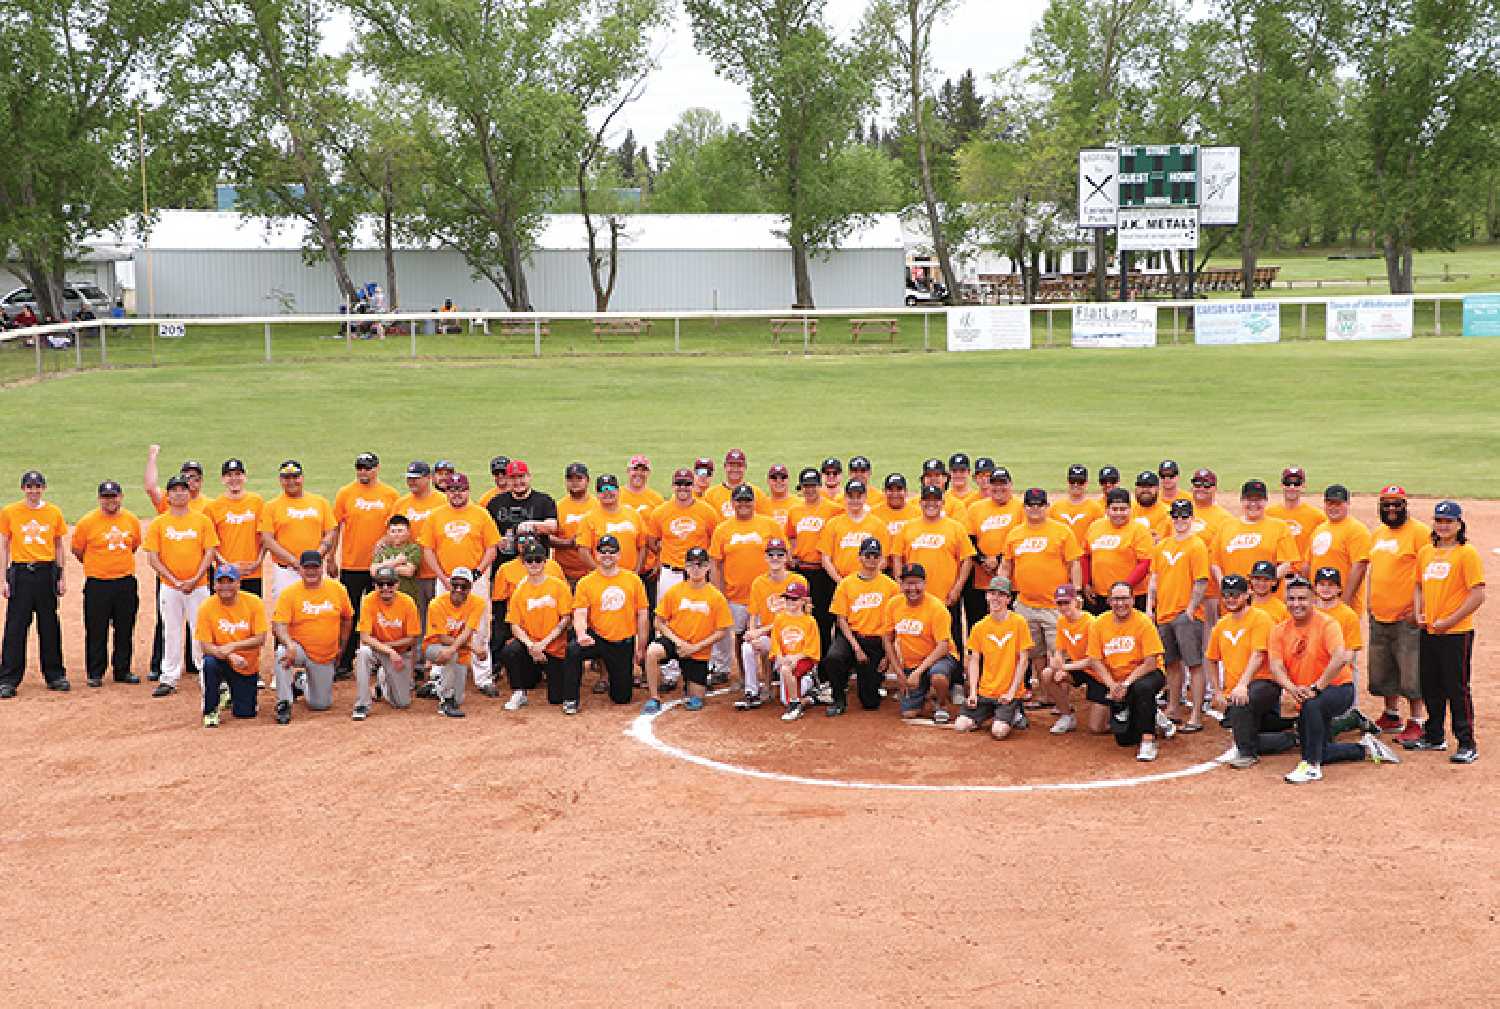 In Whitewood, within Treaty 4 territory, the Fleming Jets, Kahkewistahaw Jays, Whitewood Falcons, Round Lake Braves, Grenfell Gems and Cowessess Royals of the South East Men’s Fastball League, played games against one another to promote reconciliation between Indigenous and non-Indigenous peoples. All of the teams wore orange shirts with each of their team’s logos on it that day.